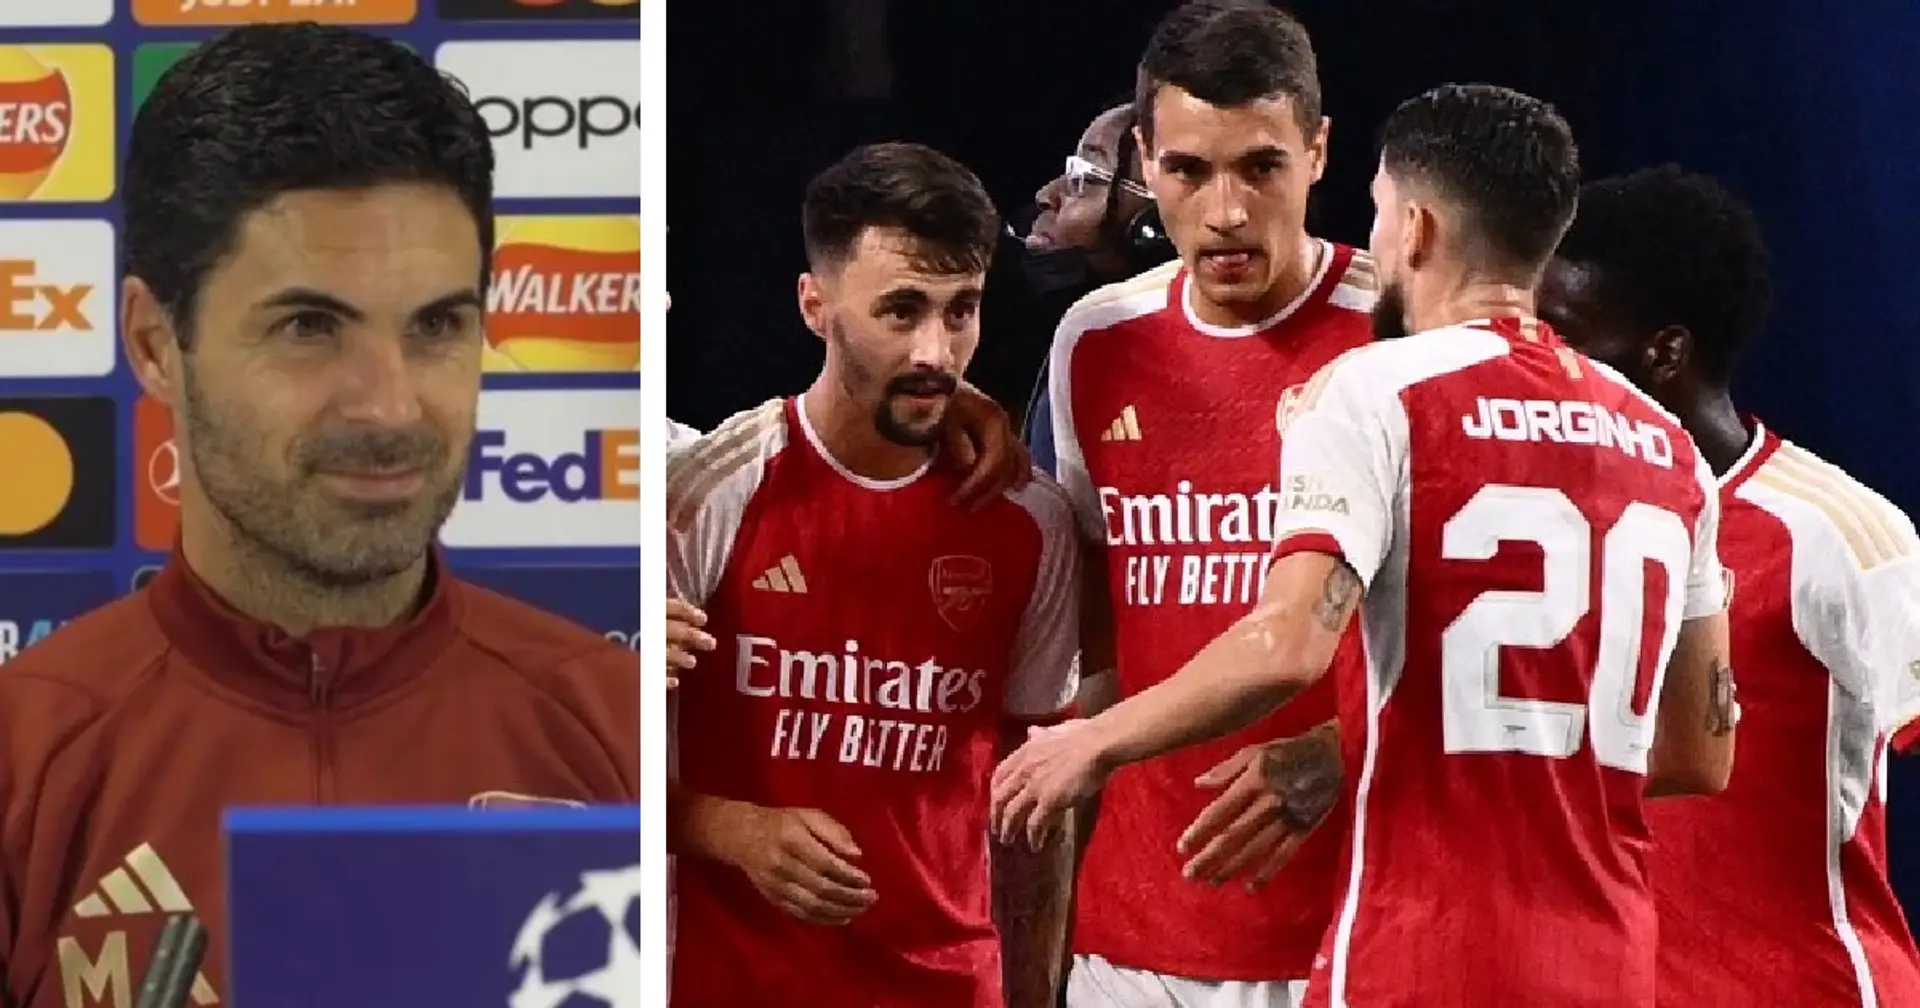 'That was my fault': Arteta takes blame for his player's difficult start at Arsenal - not Havertz